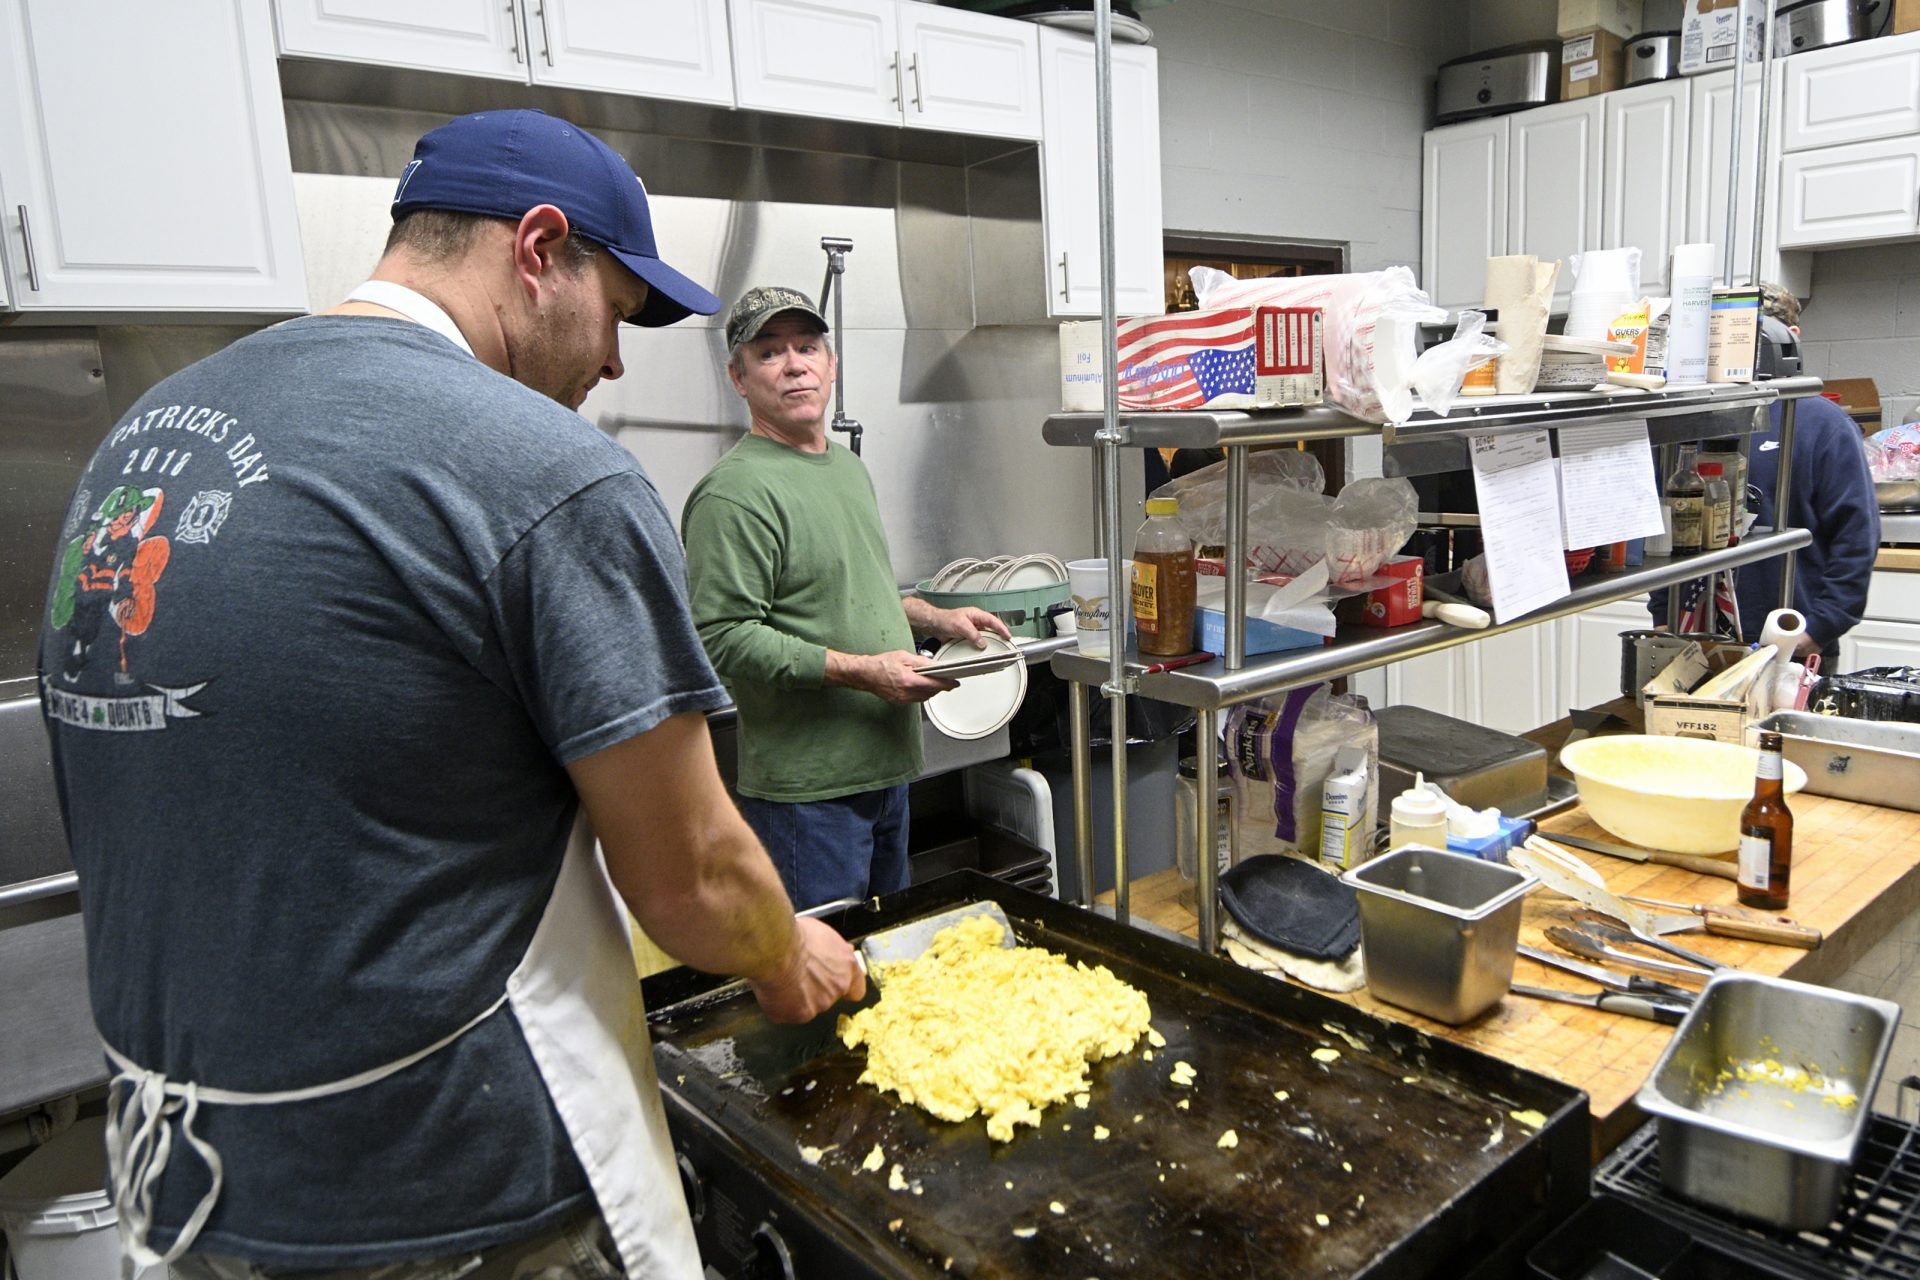 Volunteer firefighters prepare breakfast for the monthly All You Can Eat event at the Social Quarters of Humane Fire Co., in Pottsville, PA, on December 15, 2019.